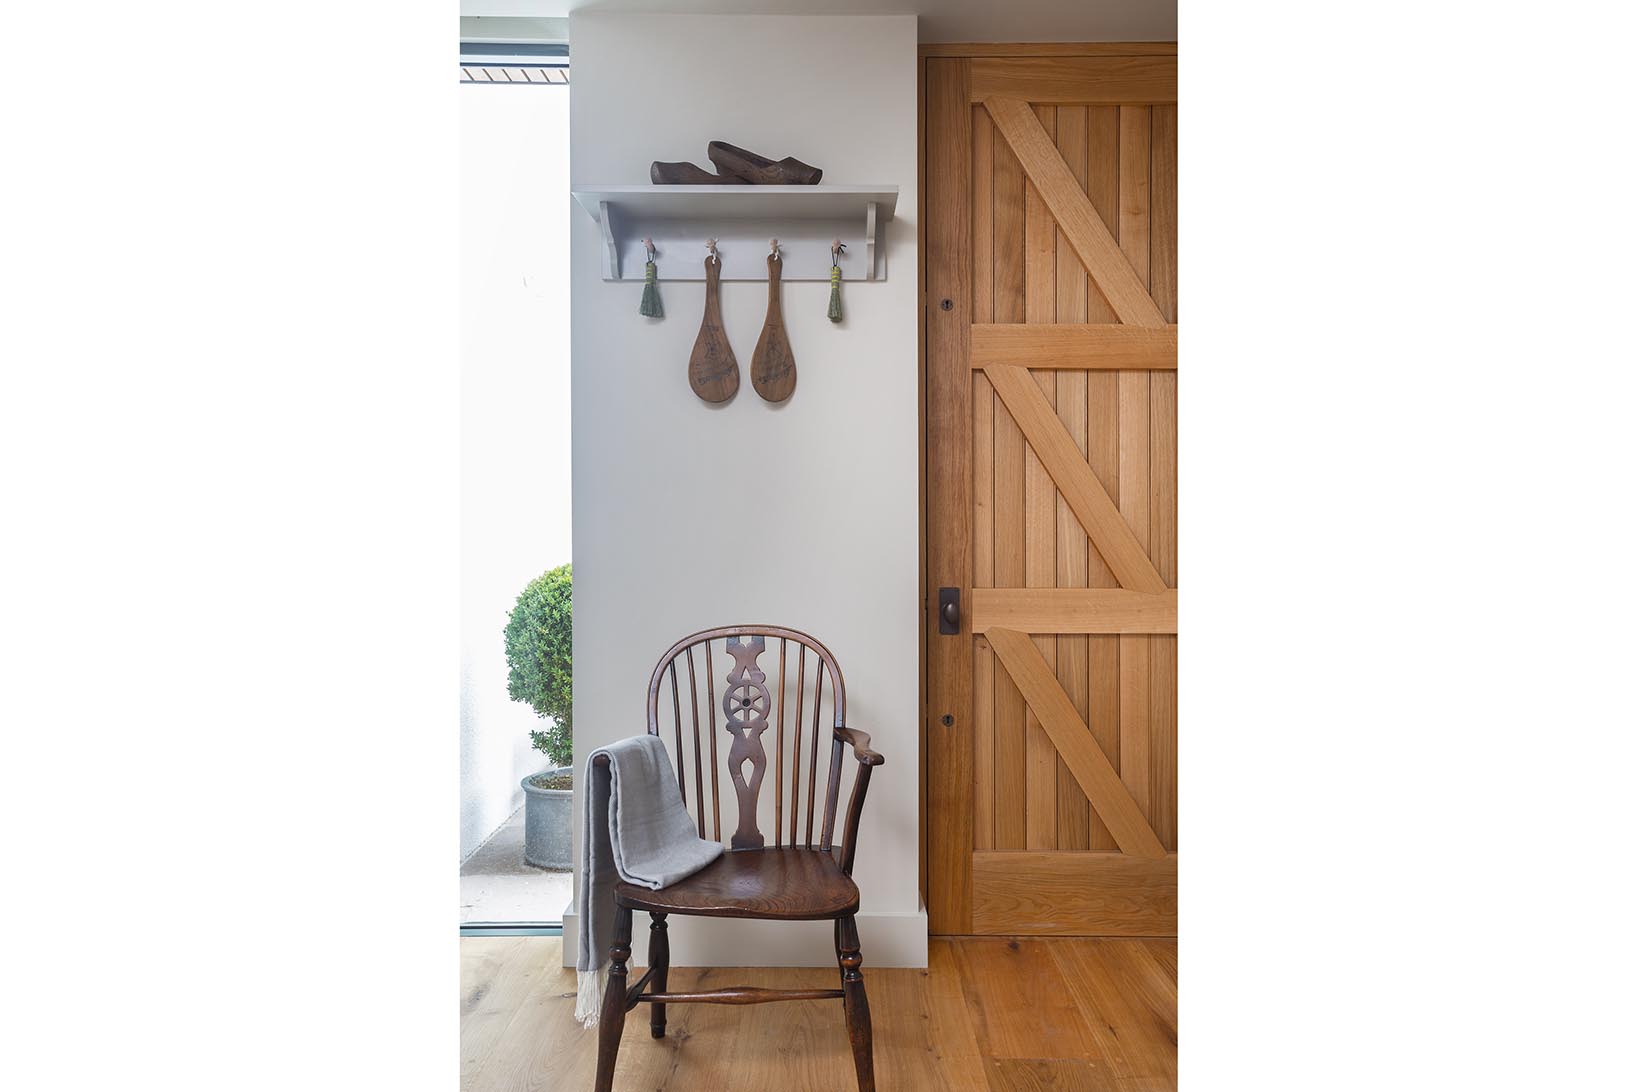 Bespoke shelf with shaker pegs and hanging utensils above a rustic wooden chair next to the bespoke utility room entrance.